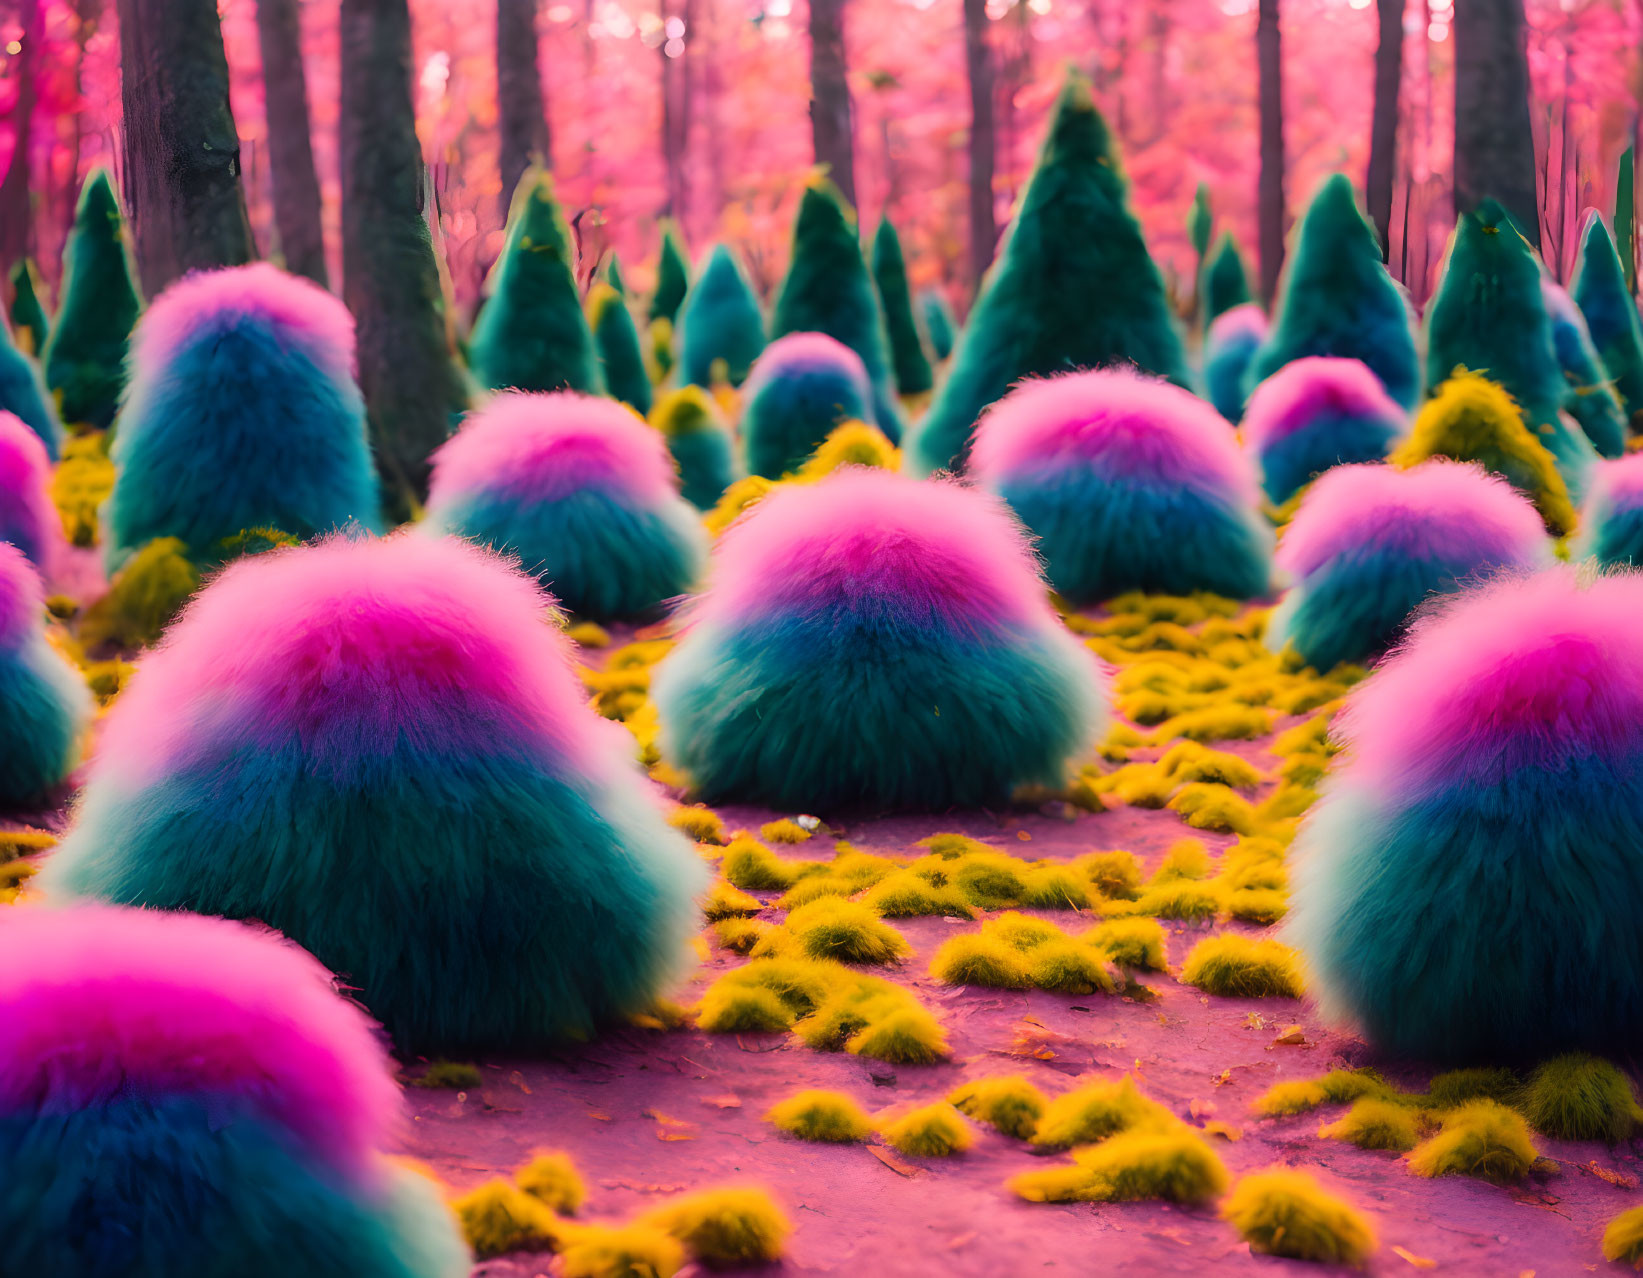 Colorful surreal forest with cone-shaped bushes and pinkish glow